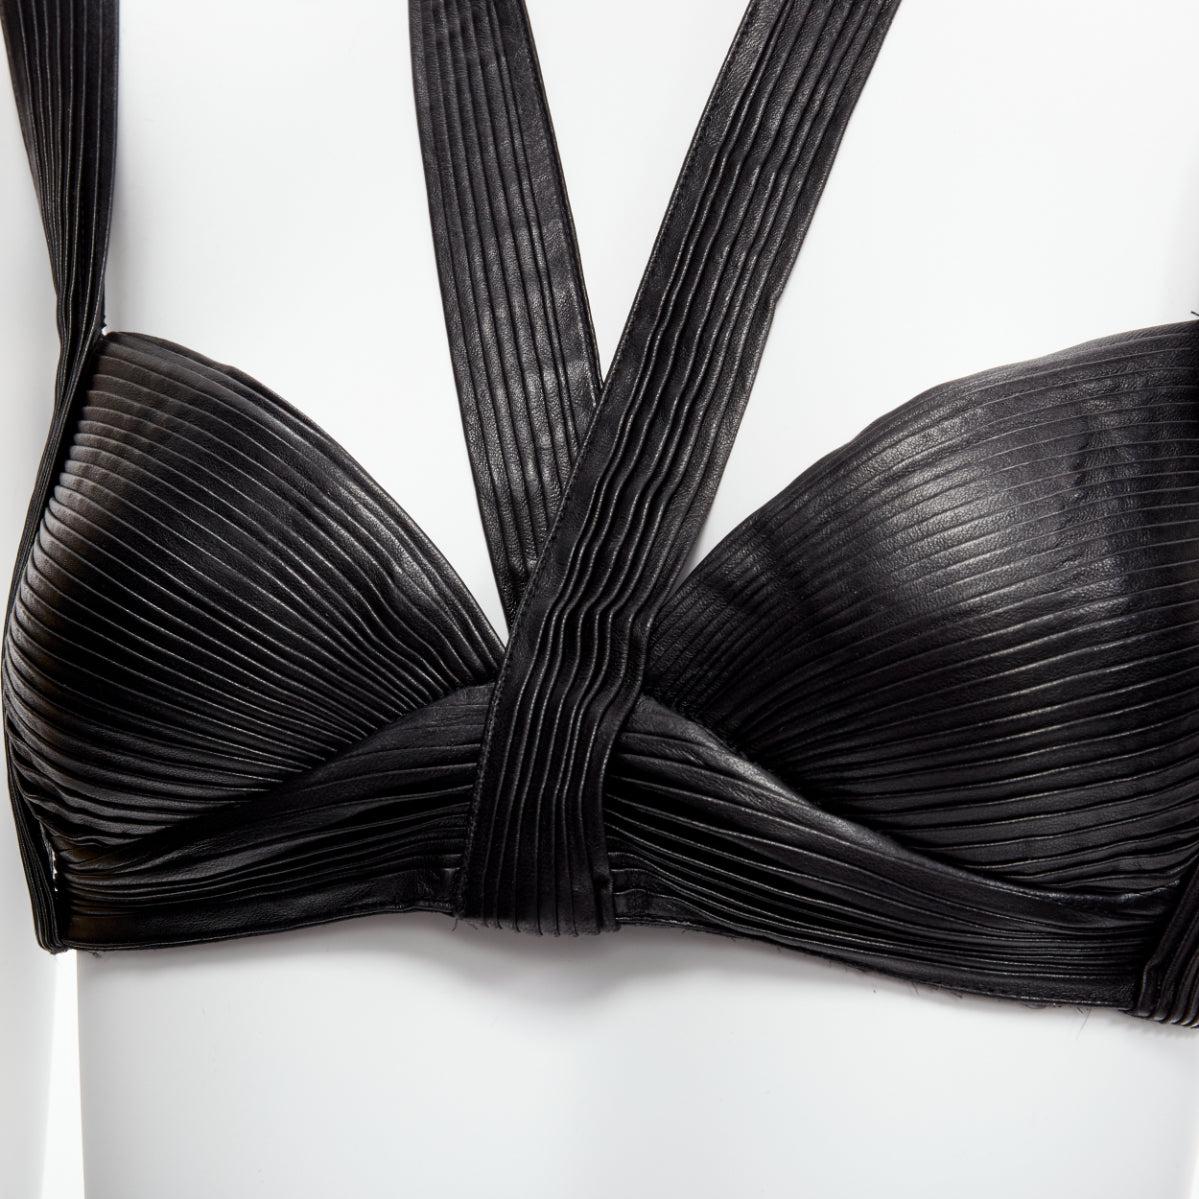 rare GIVENCHY Riccardo Tisci 2014 Runway leather pleated halter harness bra top For Sale 3